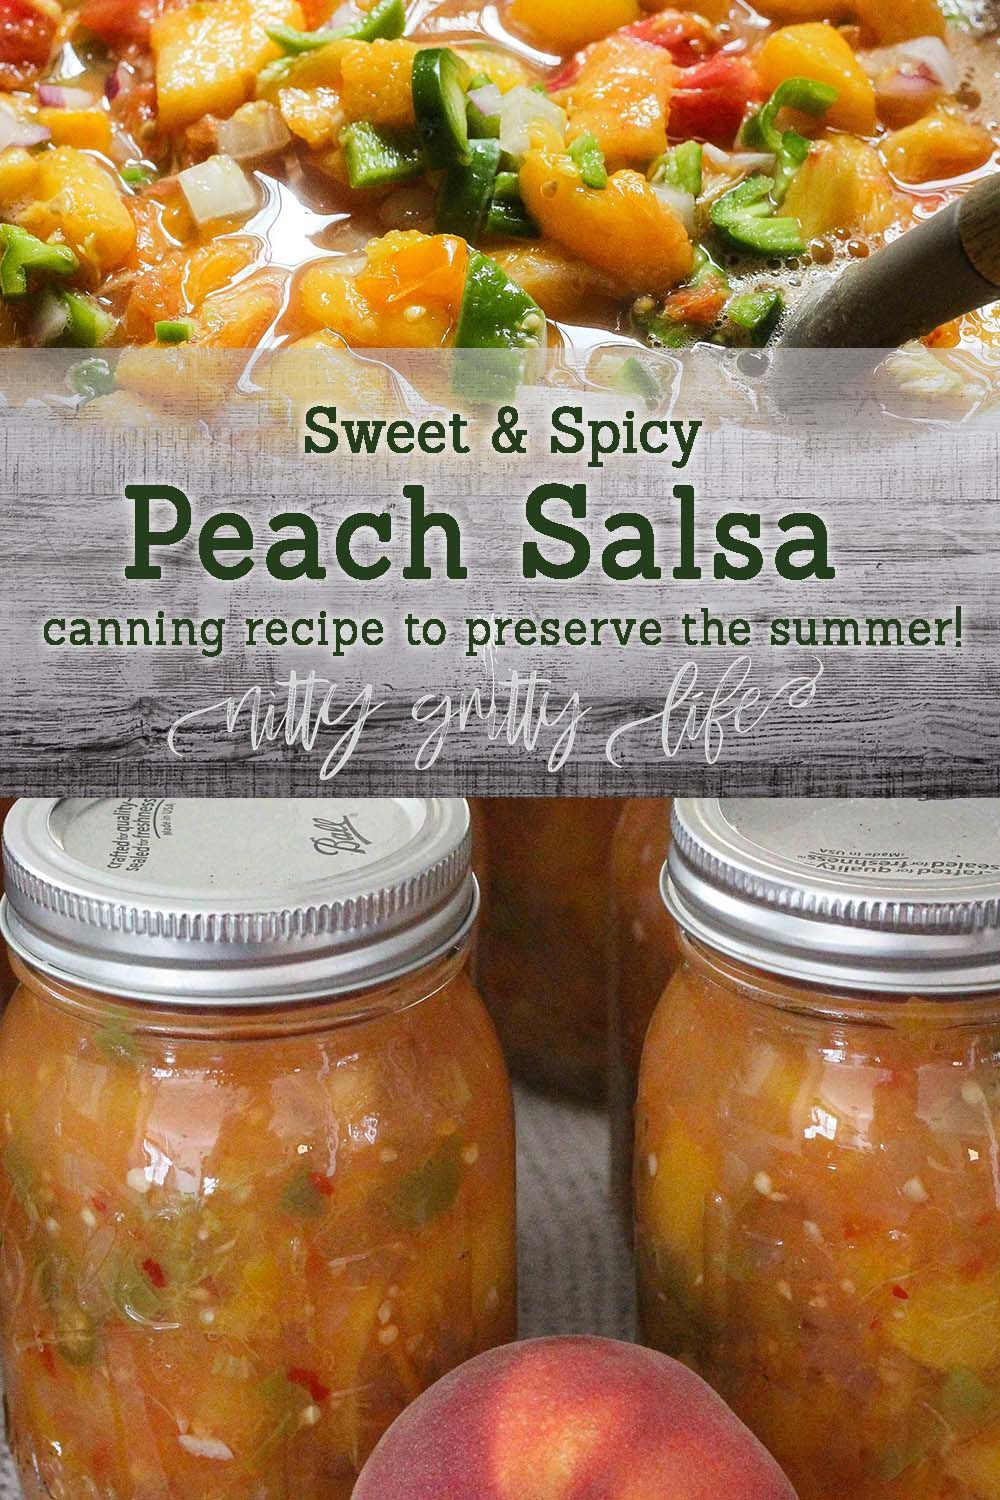 Peach Salsa Recipe For Canning
 Sweet & Spicy Peach Salsa Canning Recipe